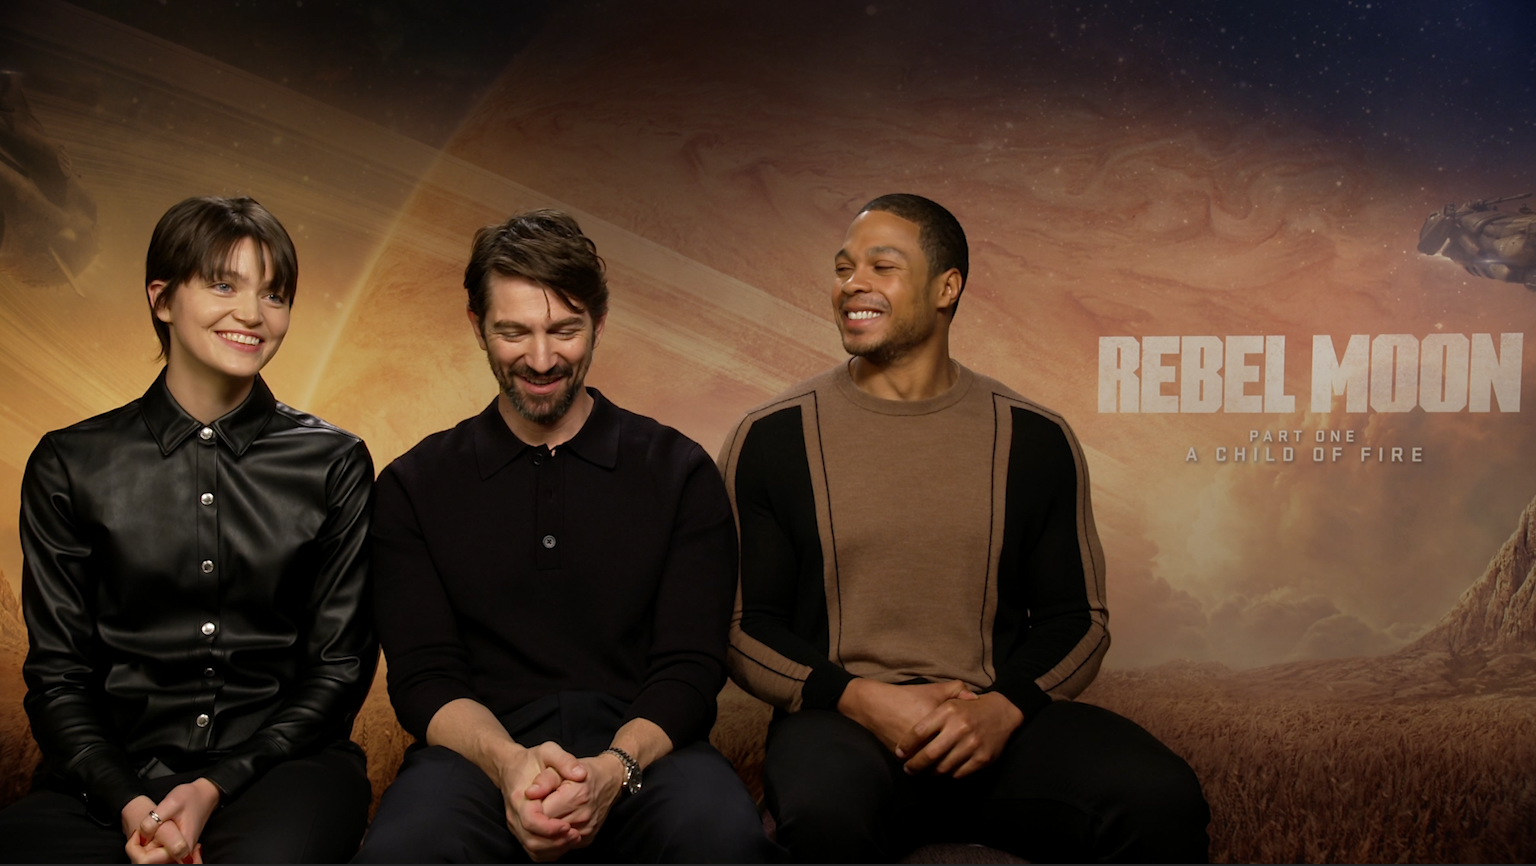 'Rebel Moon' actors E. Duffy, Michiel Huisman, and Ray Fisher (left to right) are sit against a Rebel Moon promo backdrop. All three are laughing and looking at each other